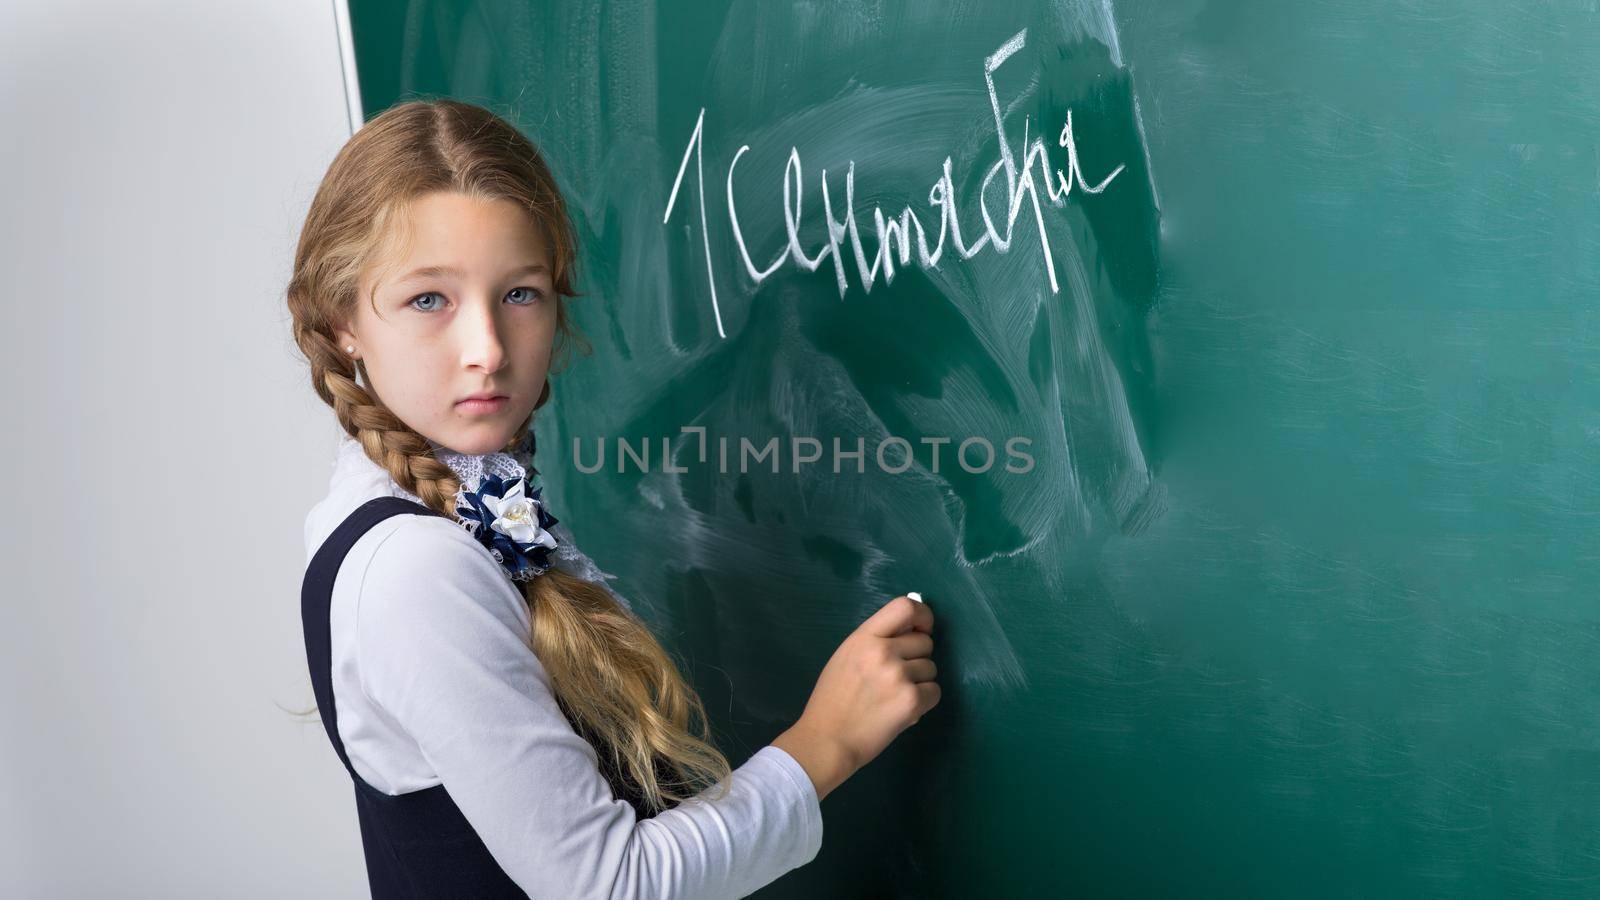 Schoolgirl writing on chalkboard in classroom. Primary school student in uniform standing in front of blackboard and writing using chalk. Back to school, education concept